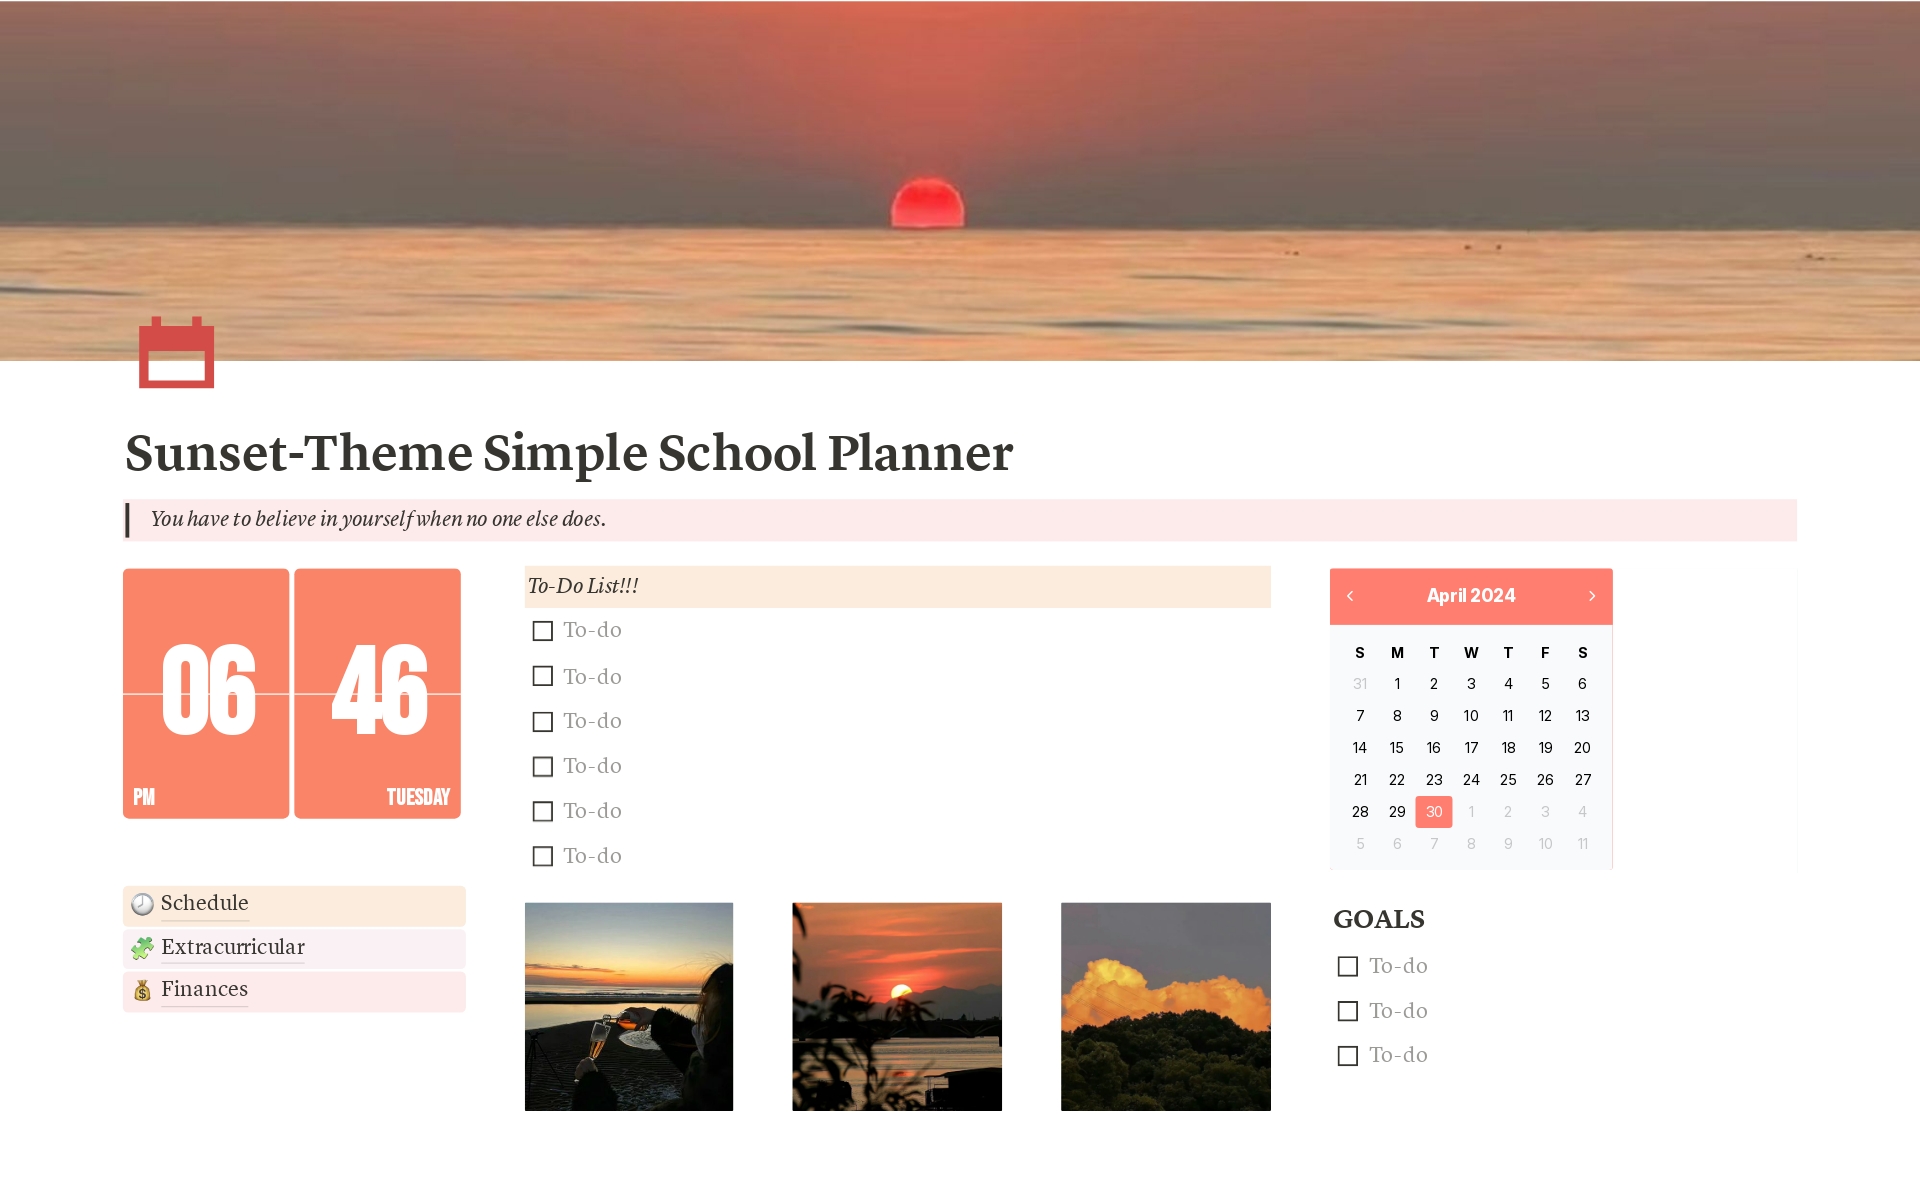 Use this templet to organize your student life with a few easily-navigated buttons
- Schedule
- To-do lists
- Goals
- Extracurricular
- Finances